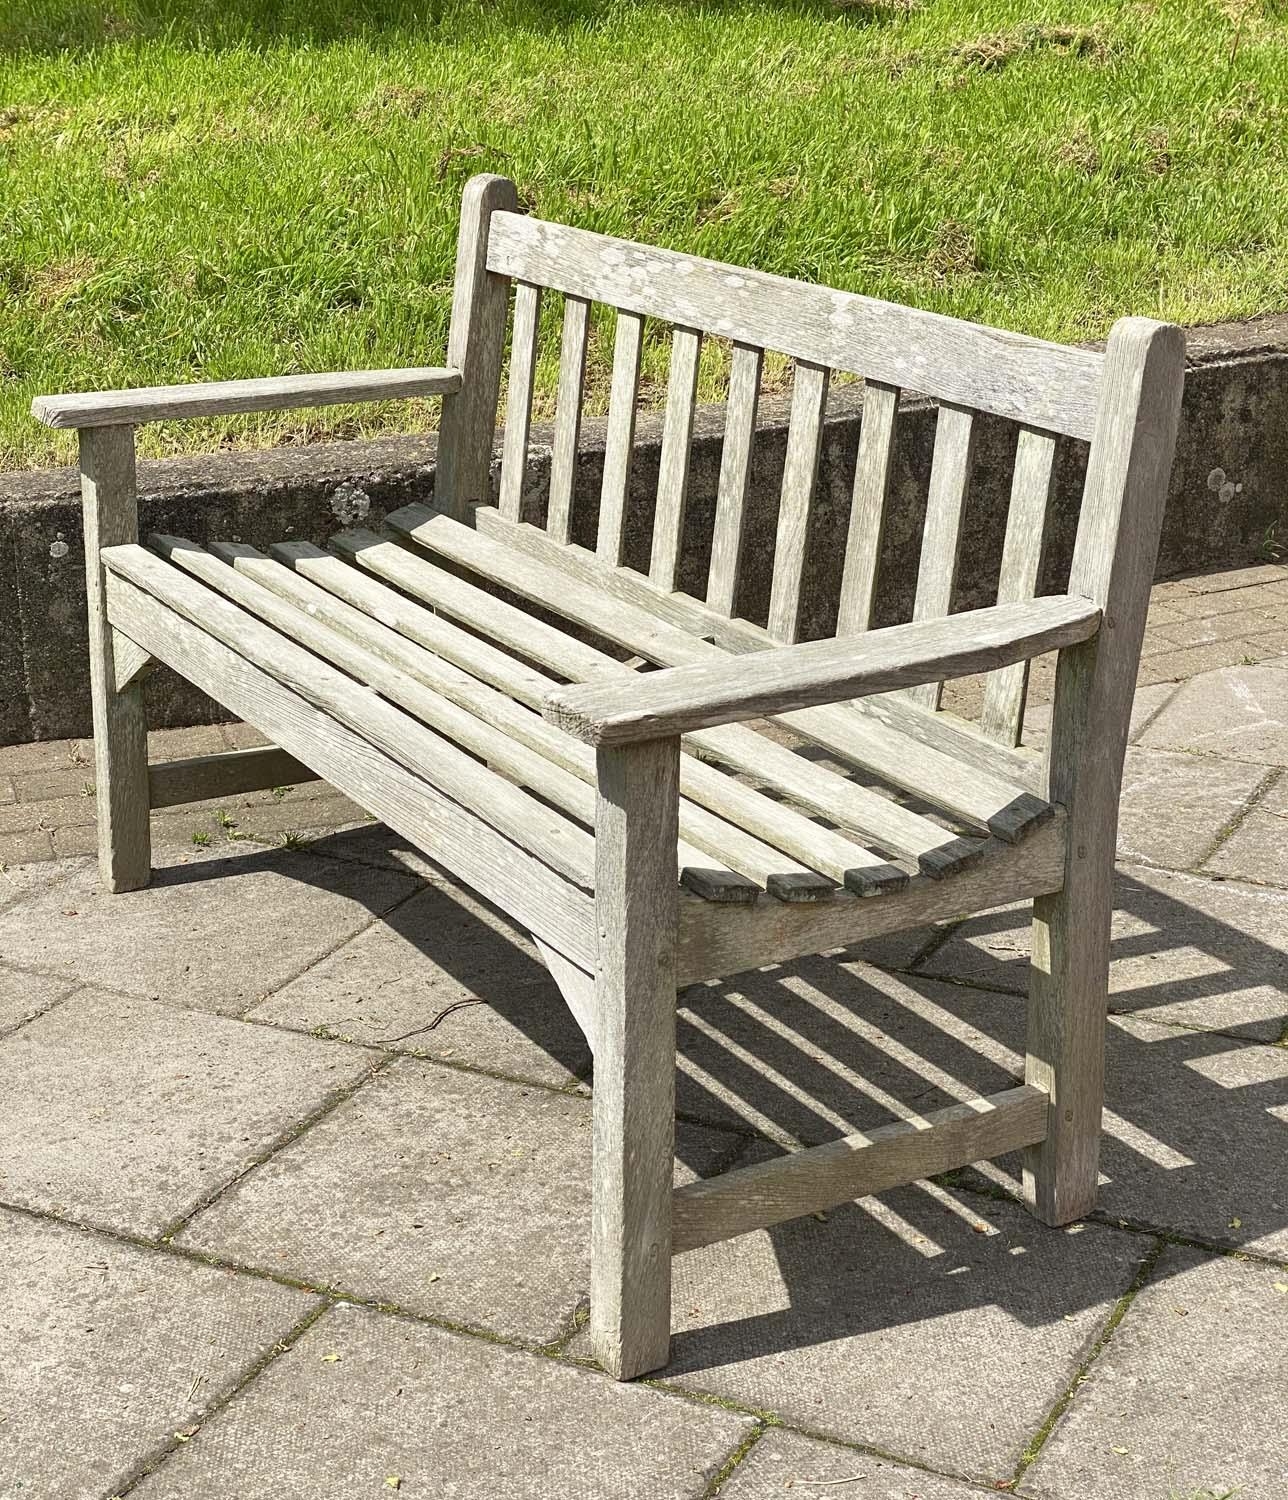 LISTER GARDEN BENCH, silvery weathered teak of slatted construction with flat top arms by R A Lister - Image 2 of 4